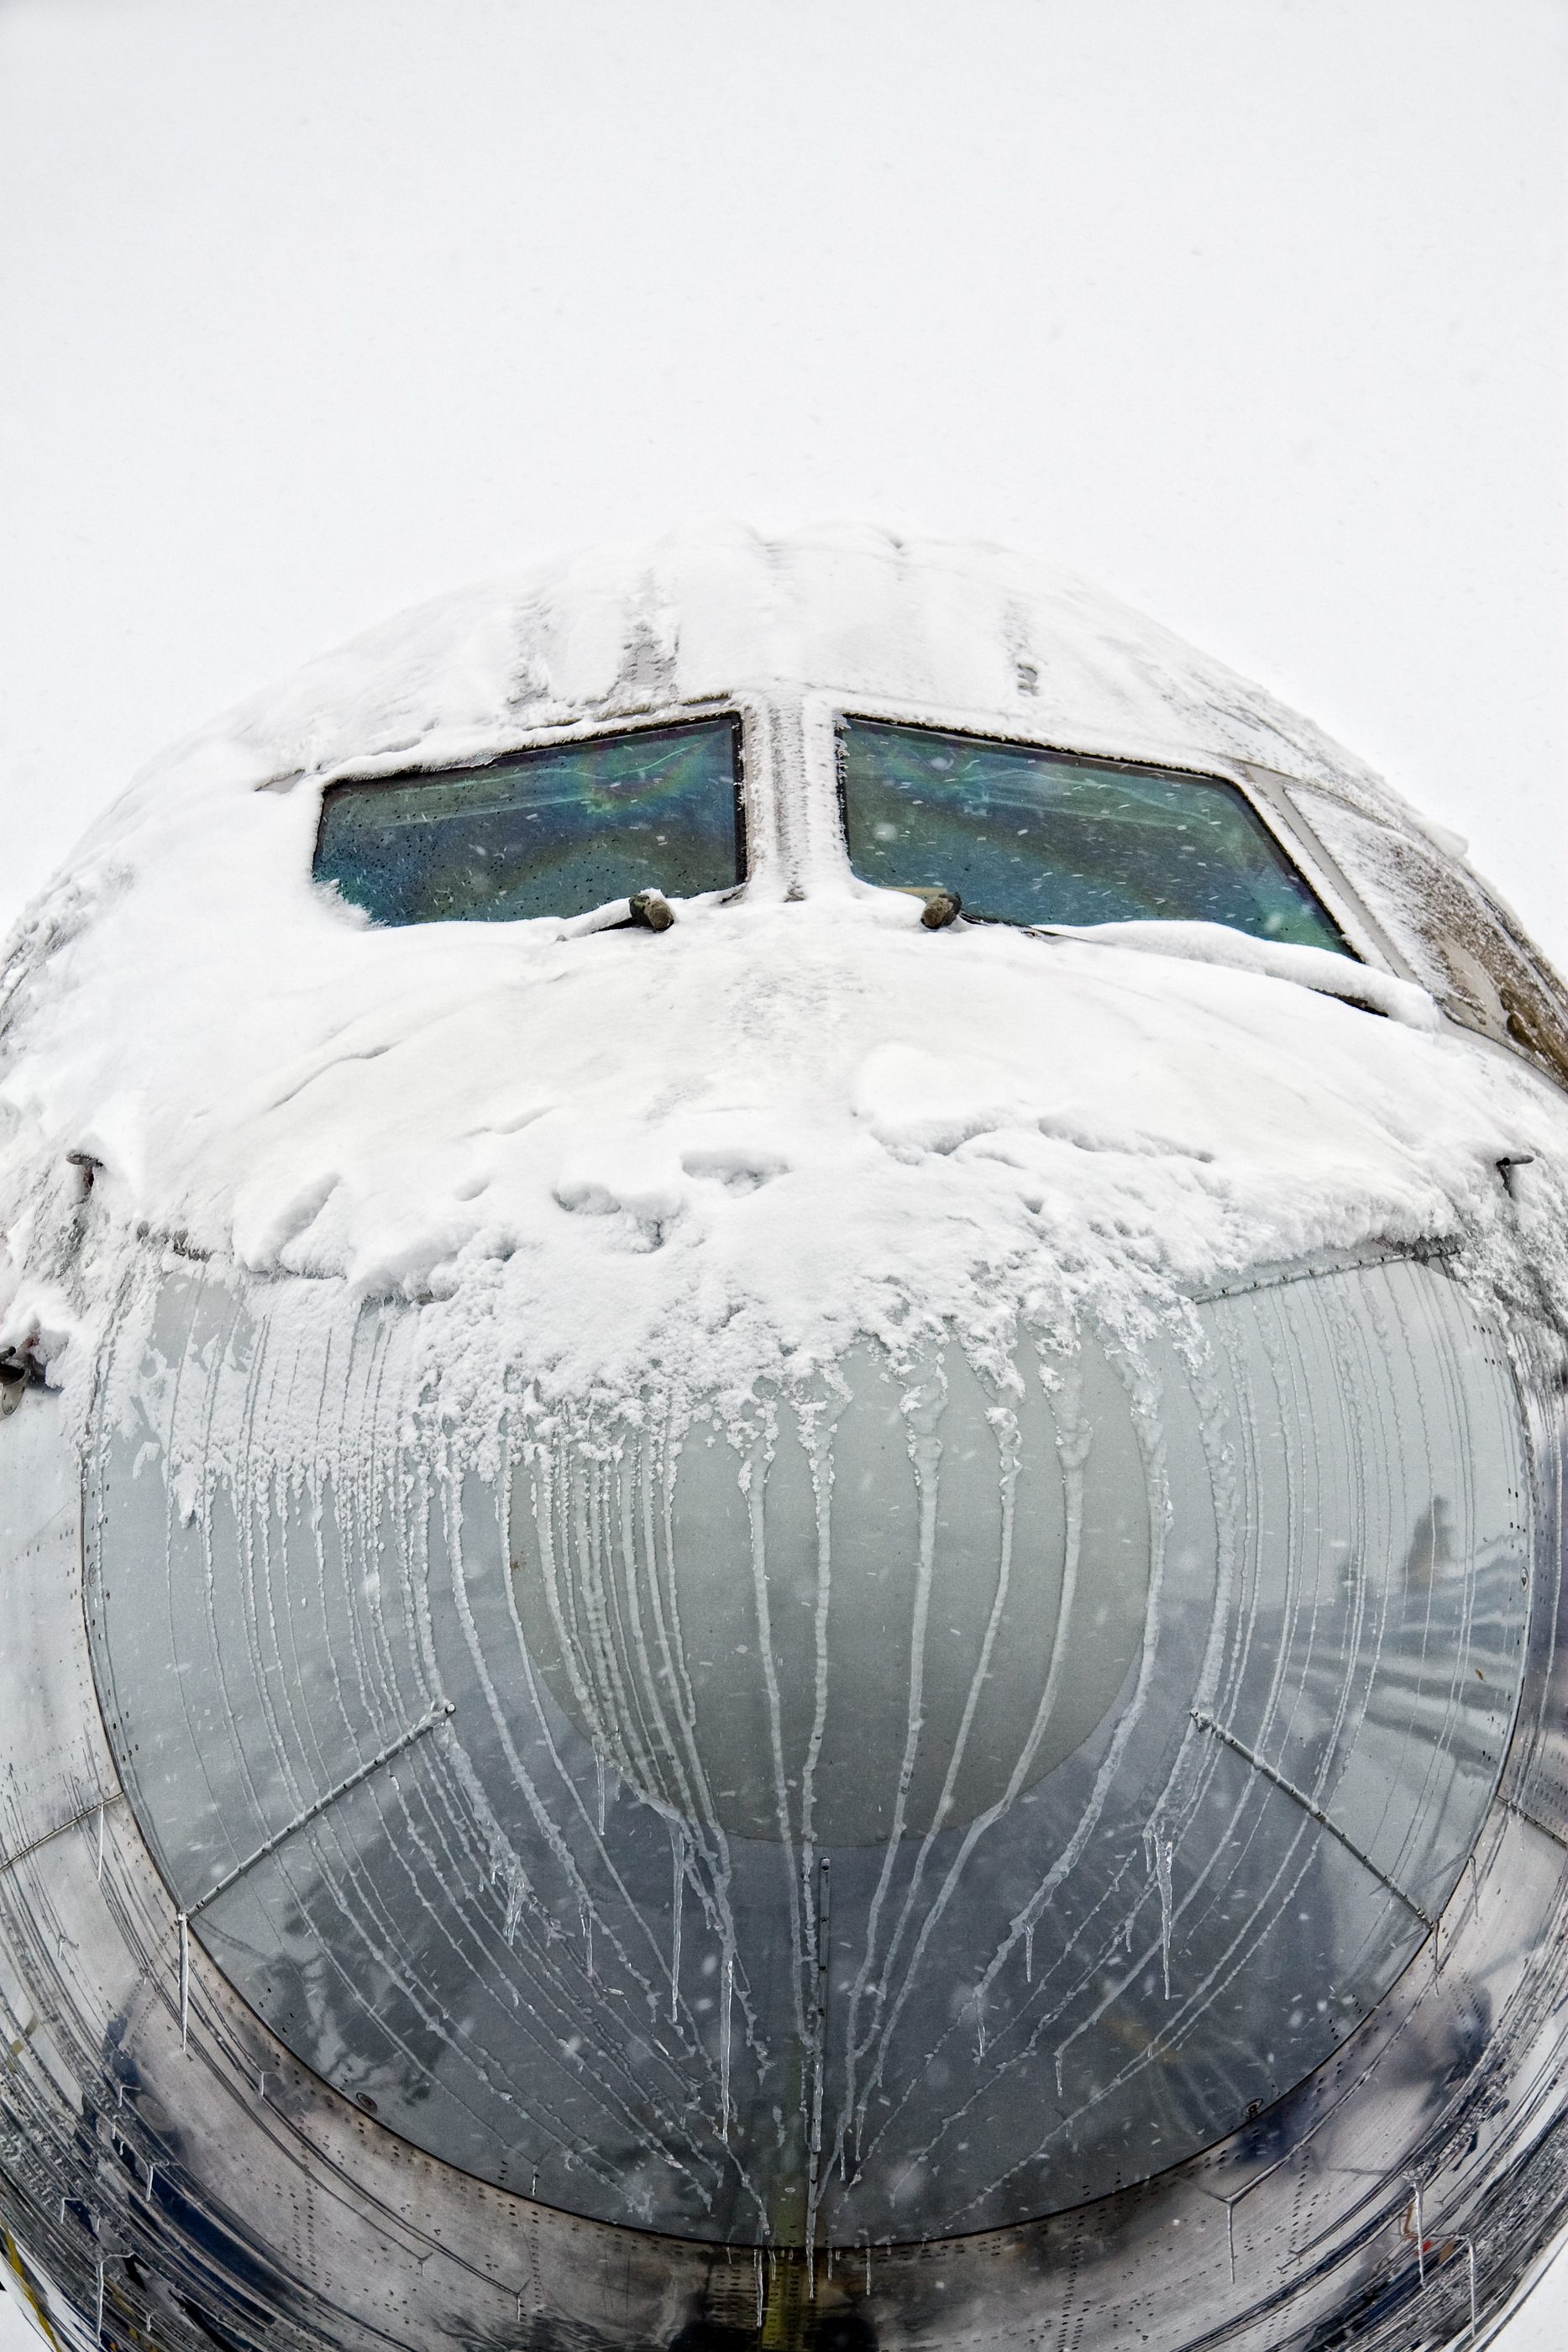 The new NASA Software Catalog includes the code LEWICE, developed to help study the effects of ice on an aircraft in flight.